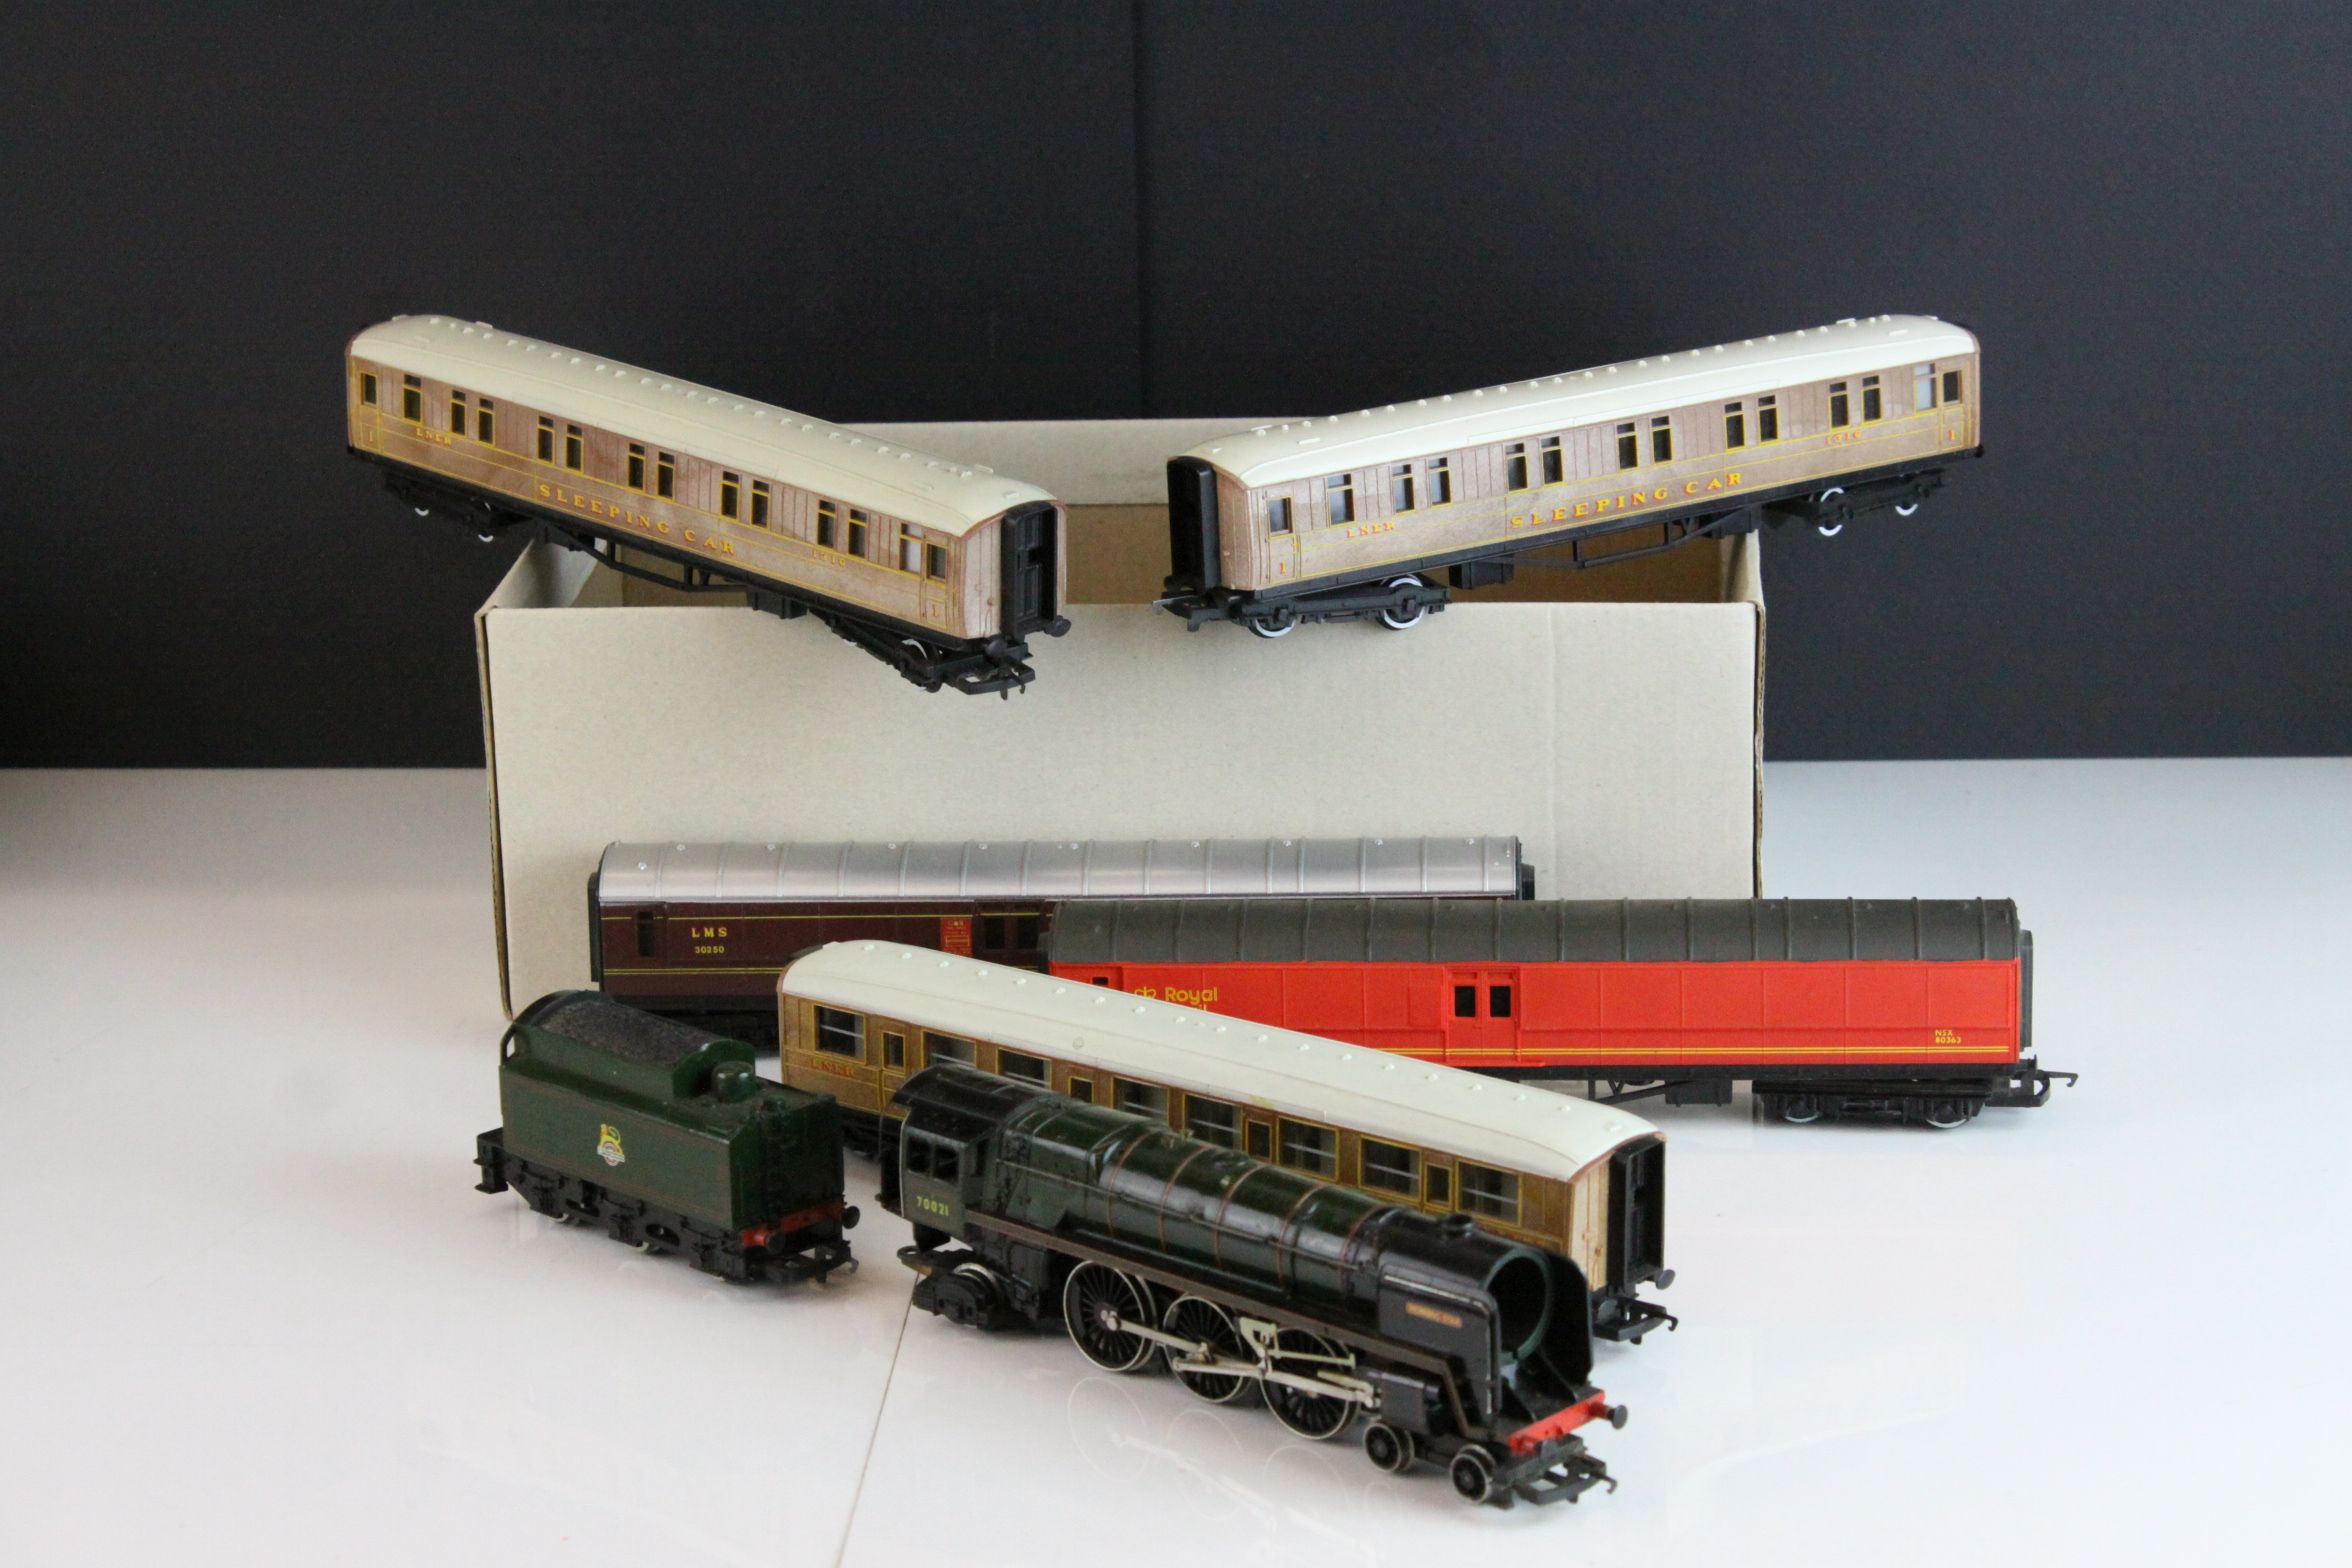 Nine Hornby OO gauge coaches featuring 2 x Royal Mail coaches plus a Hornby Morning Star 4-6-2